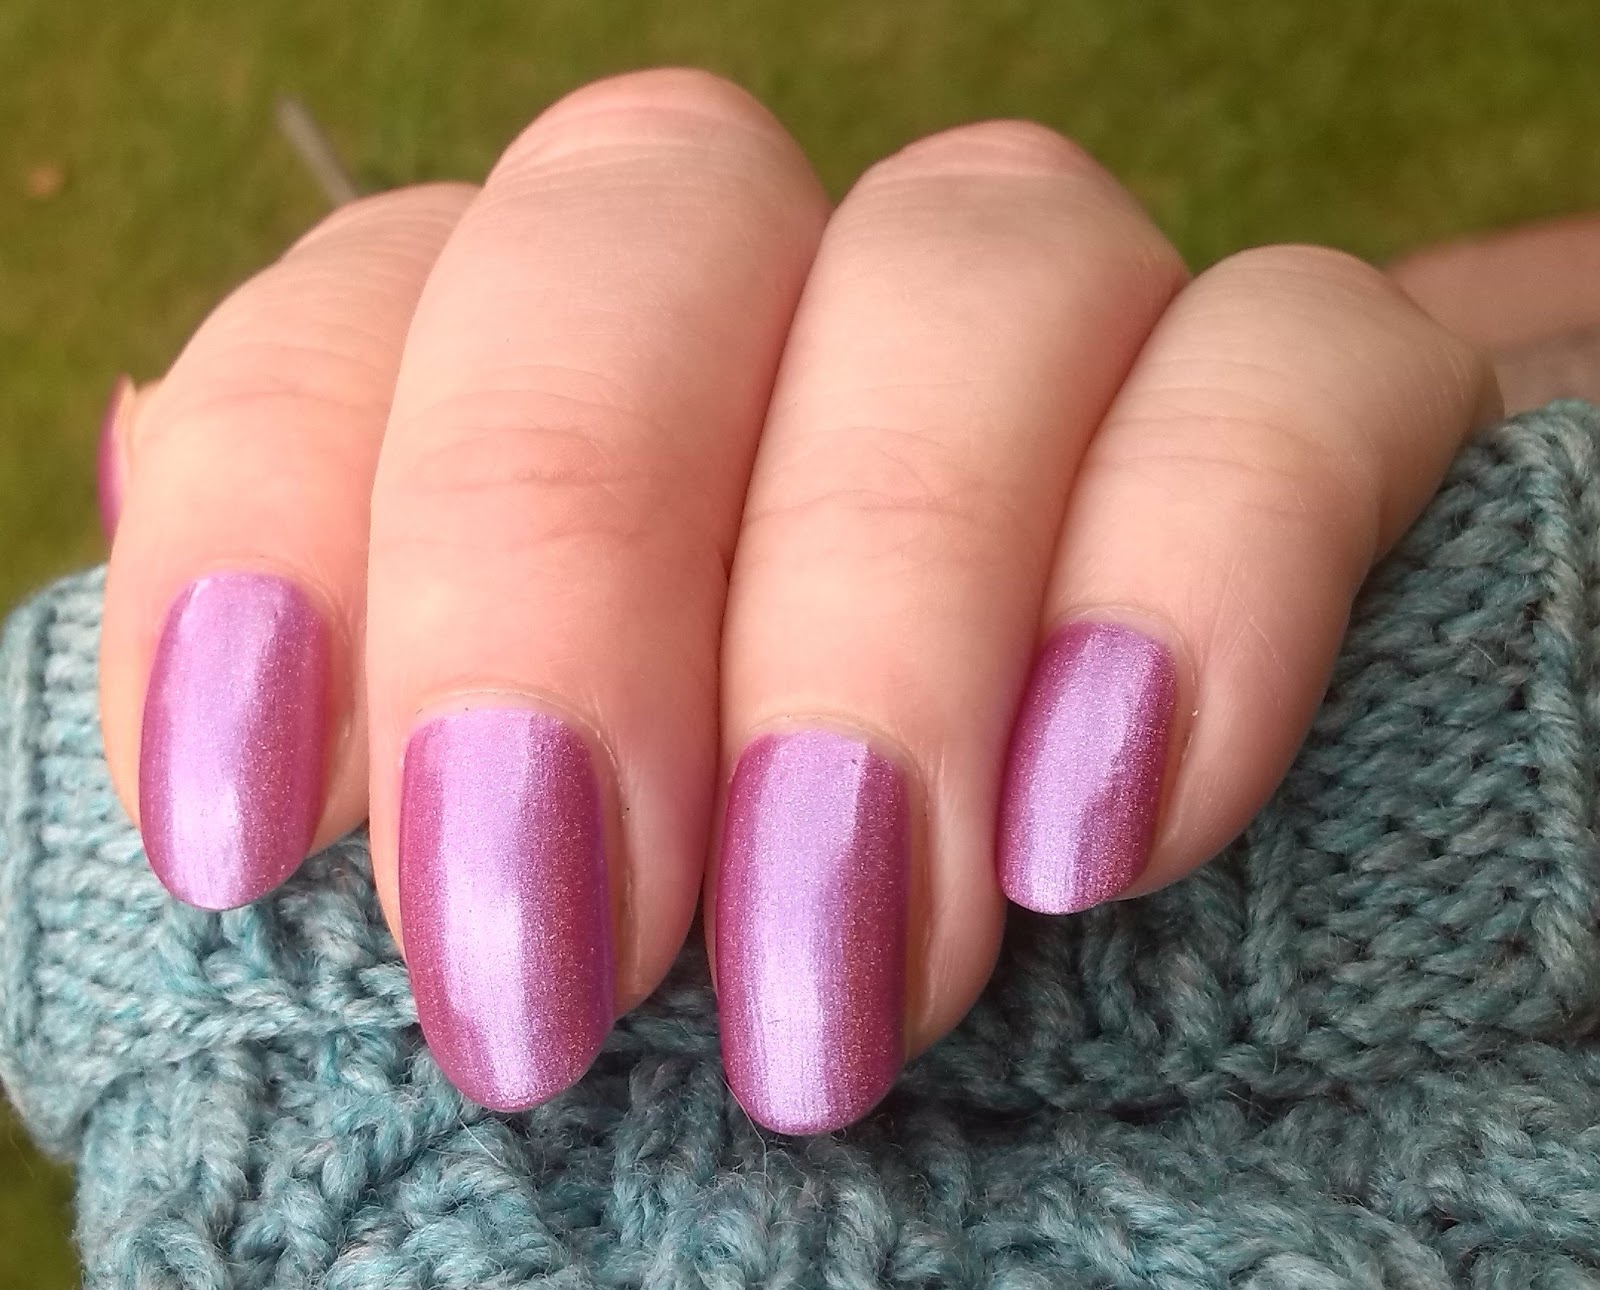 Lilypad Lacquer Blooming Violets